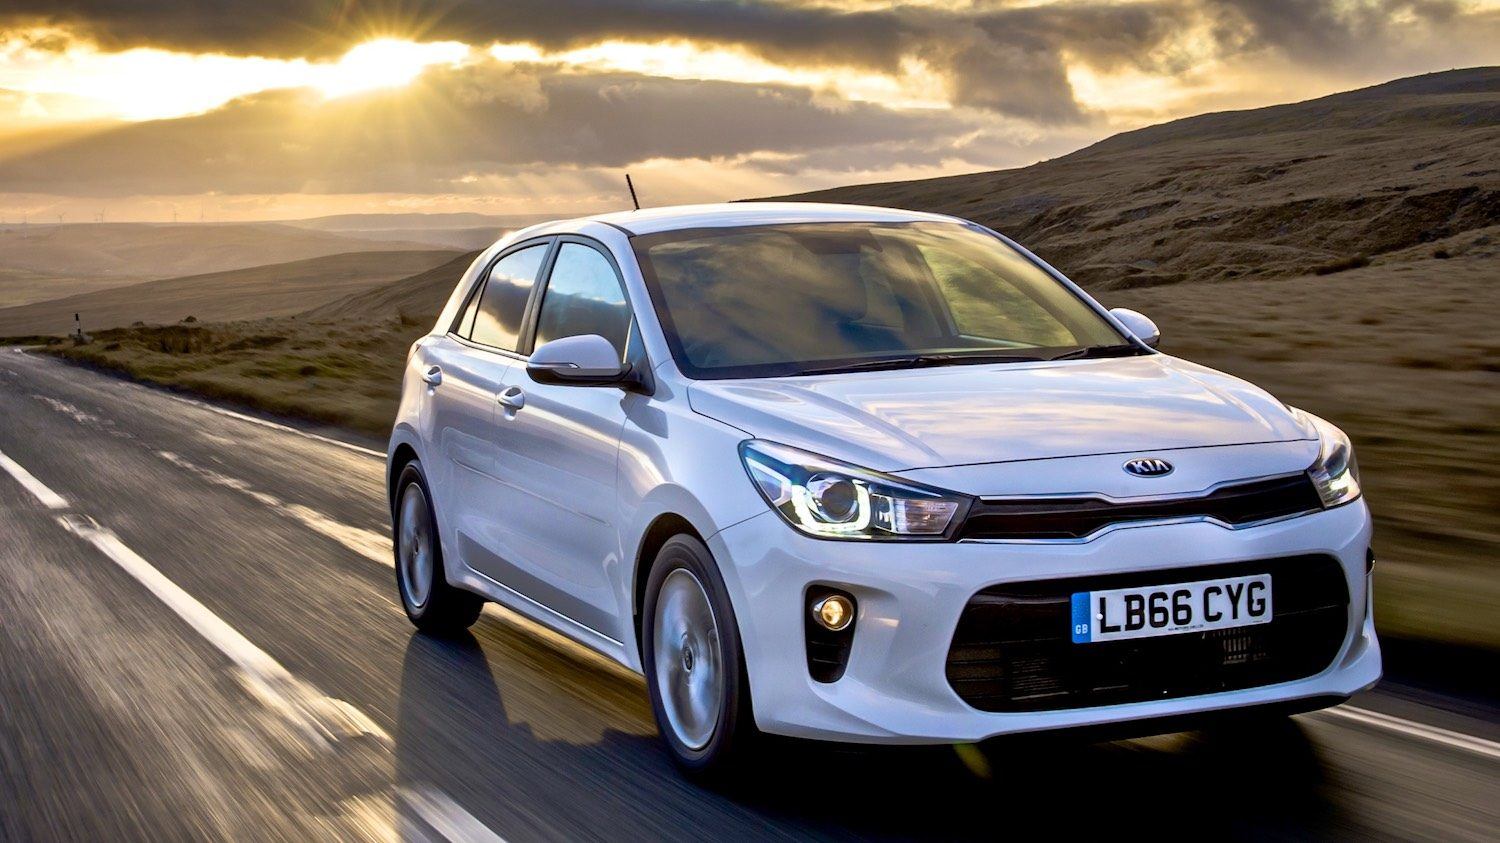 Drive.co.uk | Kia Rio Review 2017 a very well equipped hatchback